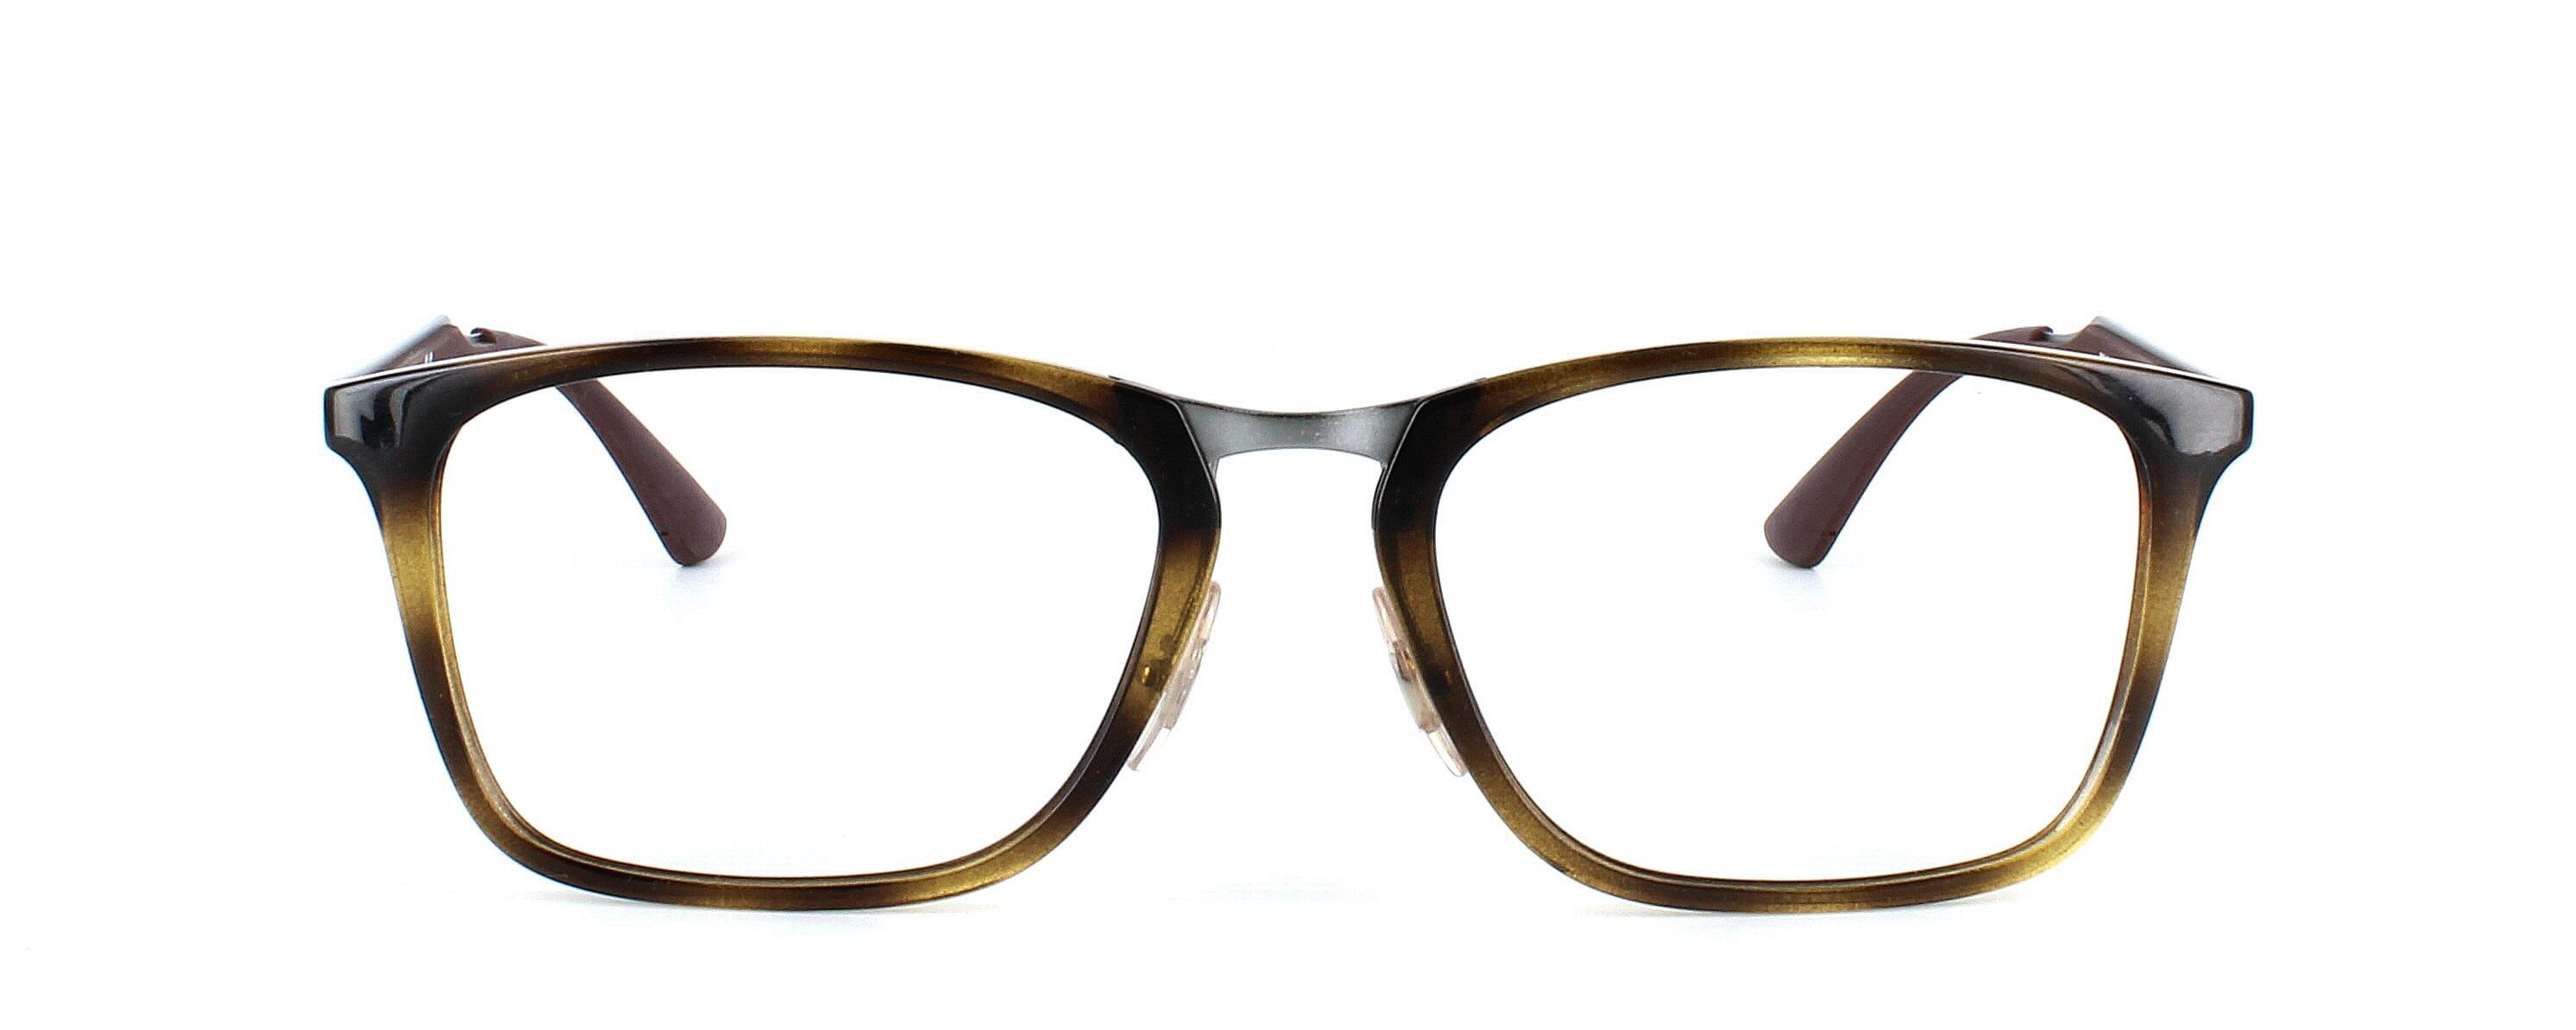 Ray Ban 7131 - Gent's tortoise acetate with metal nose bridge - image view 2